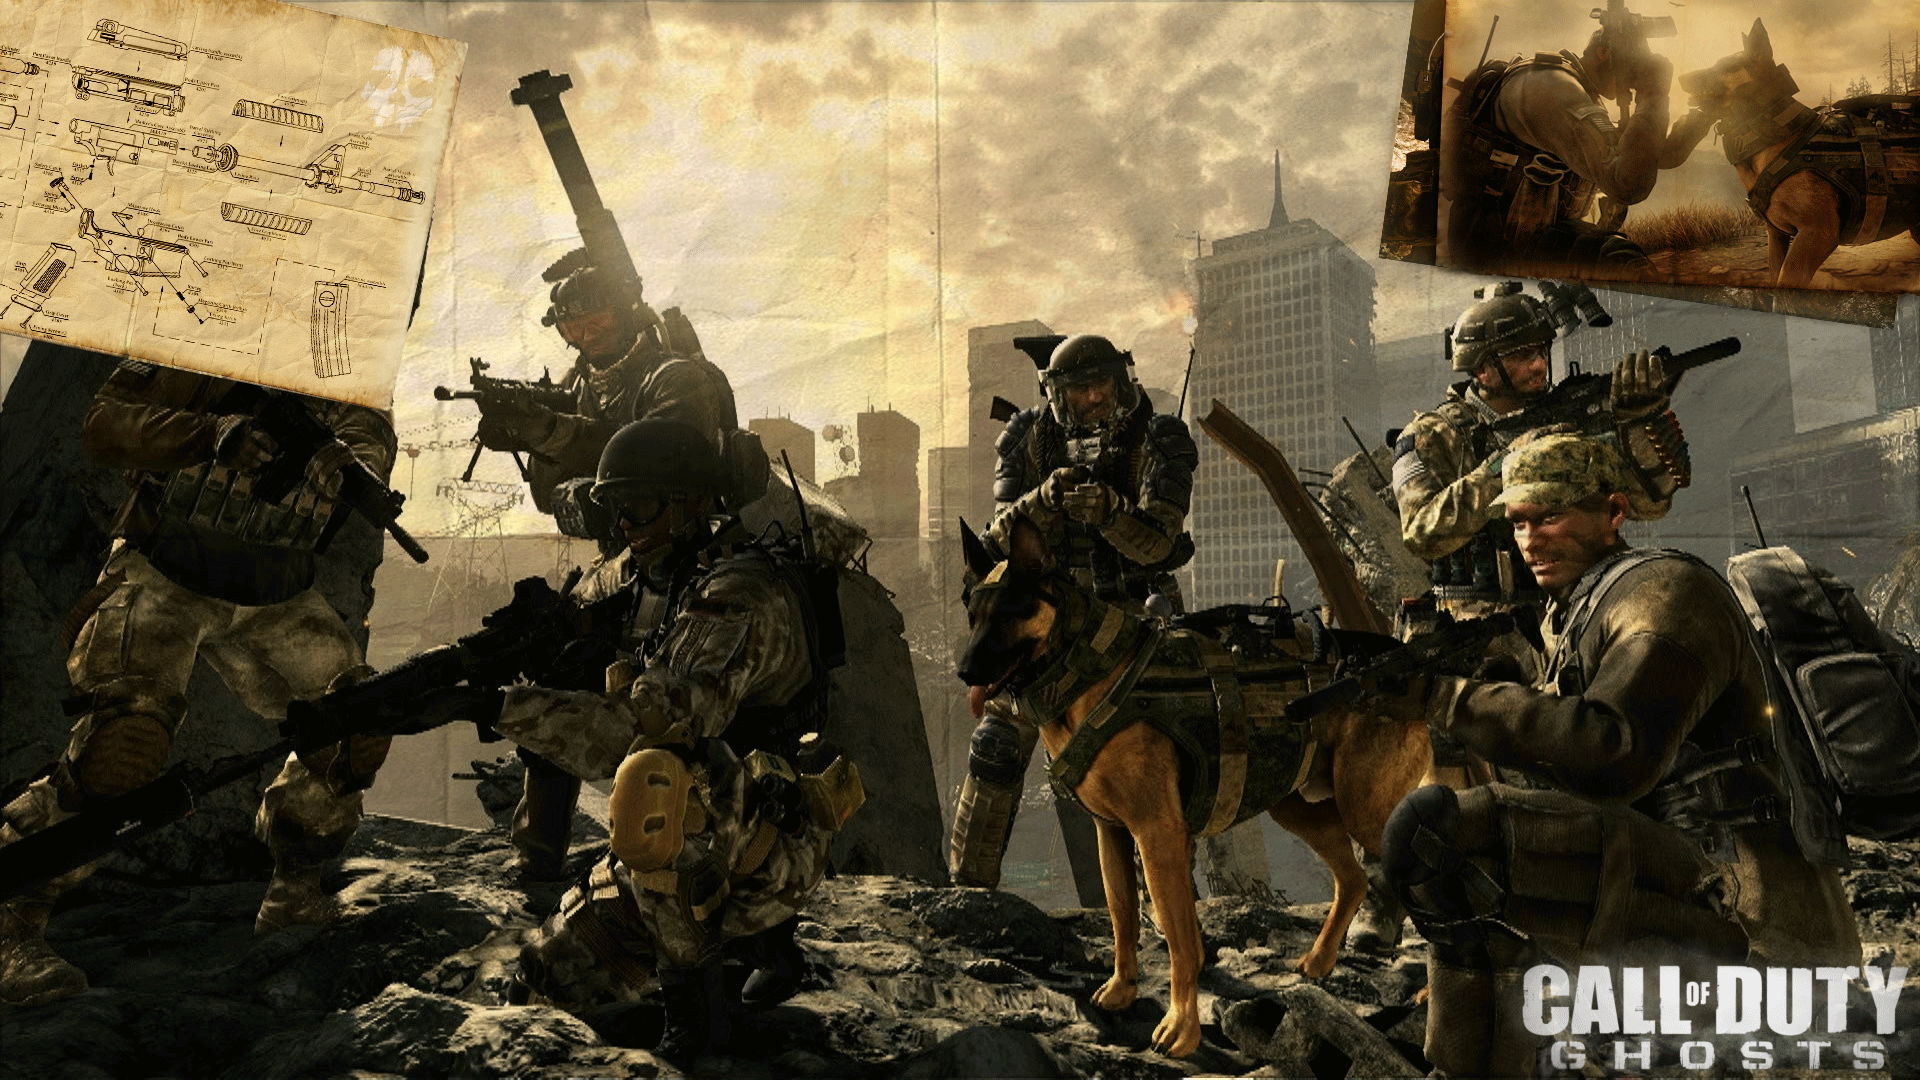 Call of Duty Ghosts background by cursedblade1337 1920x1080